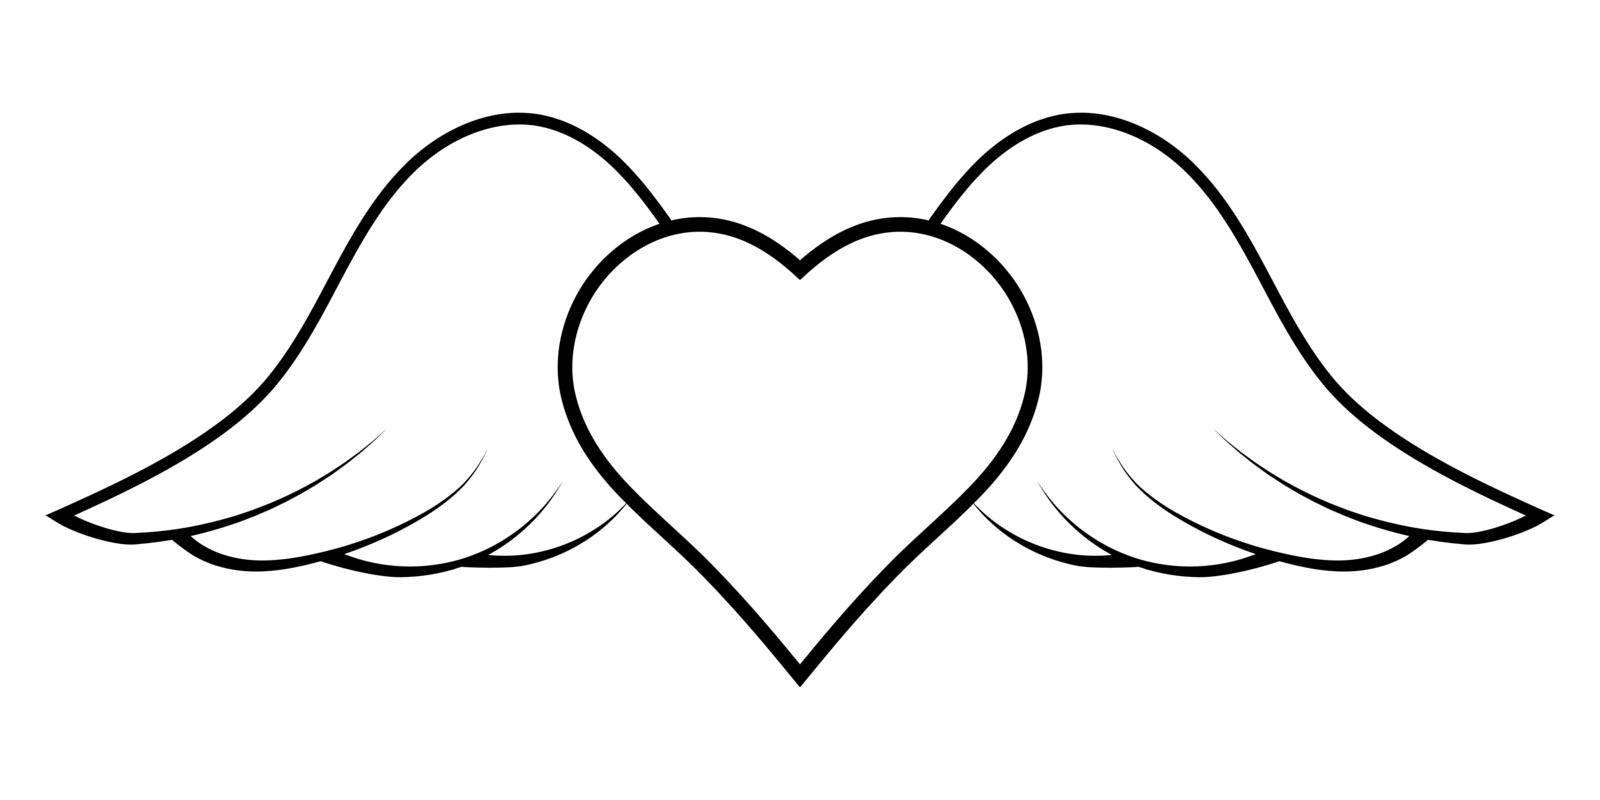 Flying heart with wings, symbol of cupid bringing love